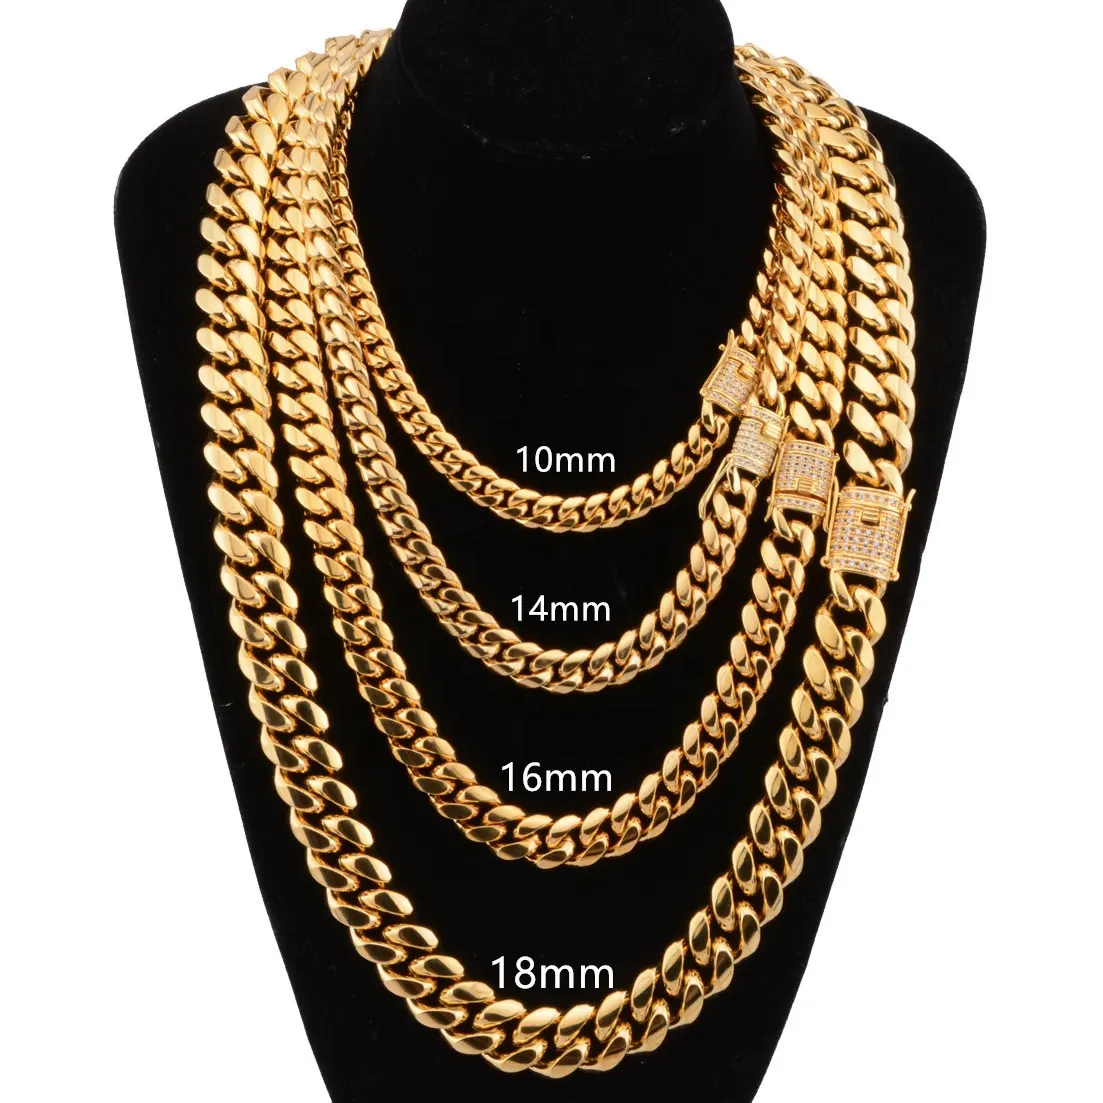 Miami Hip hop Fashion Jewelry 14K 18K Gold Stainless Steel Drill Zircon Buckle 6-18MM Chunky Cuban Link Chain Necklace Men Women